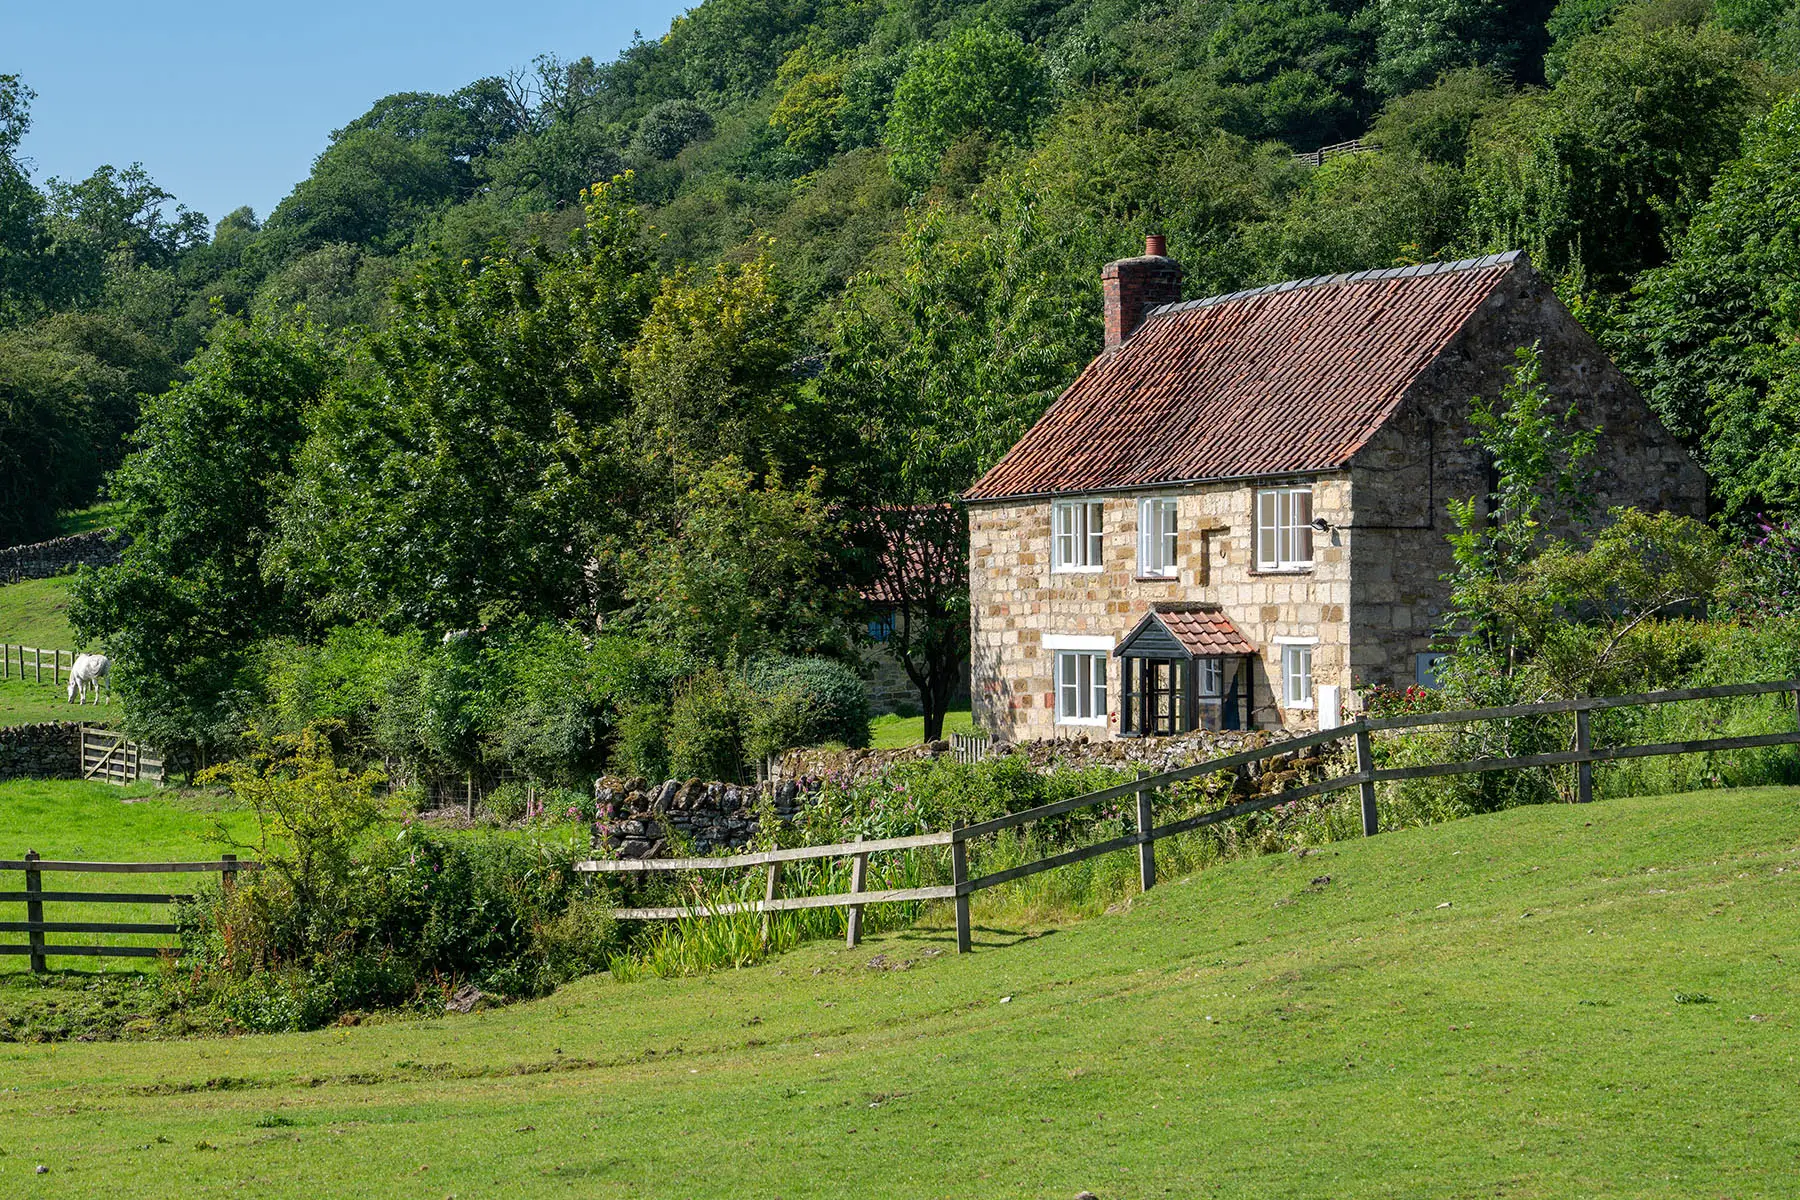 Typical English cottage